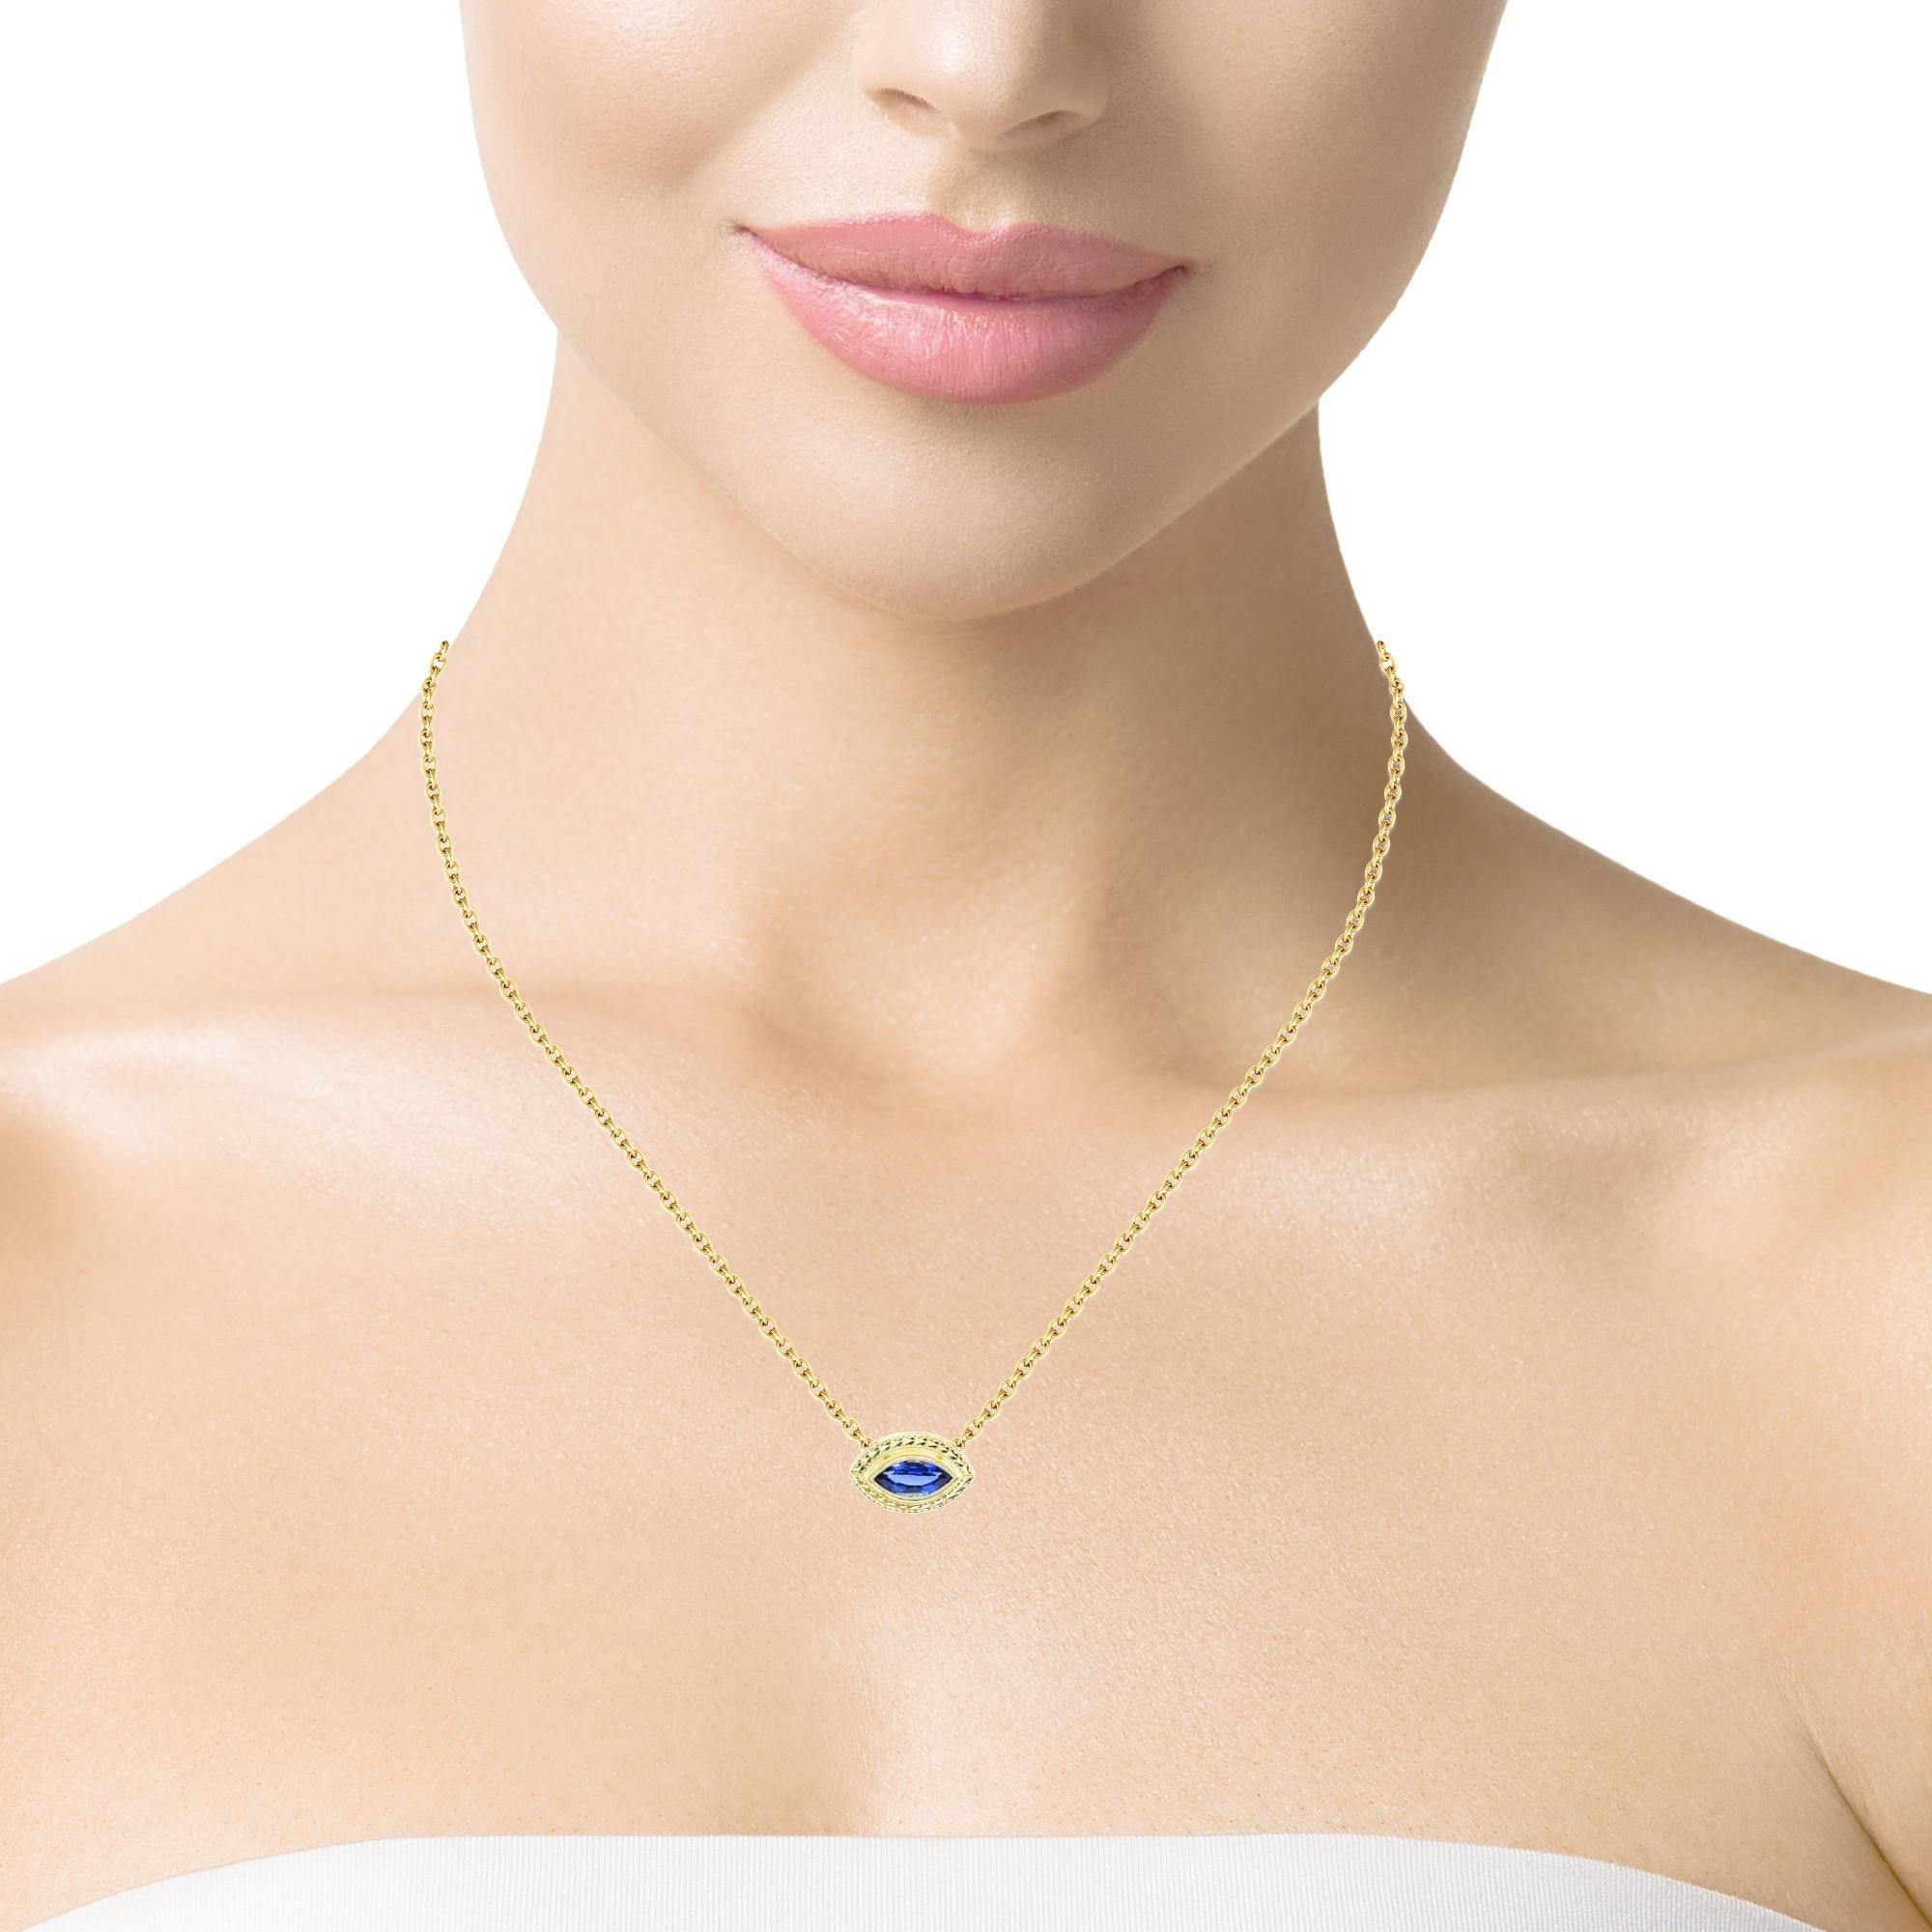 Marquise Cut Tanzanite Necklace in Yellow Gold, 2.34 Carats, Adjustable Length 3